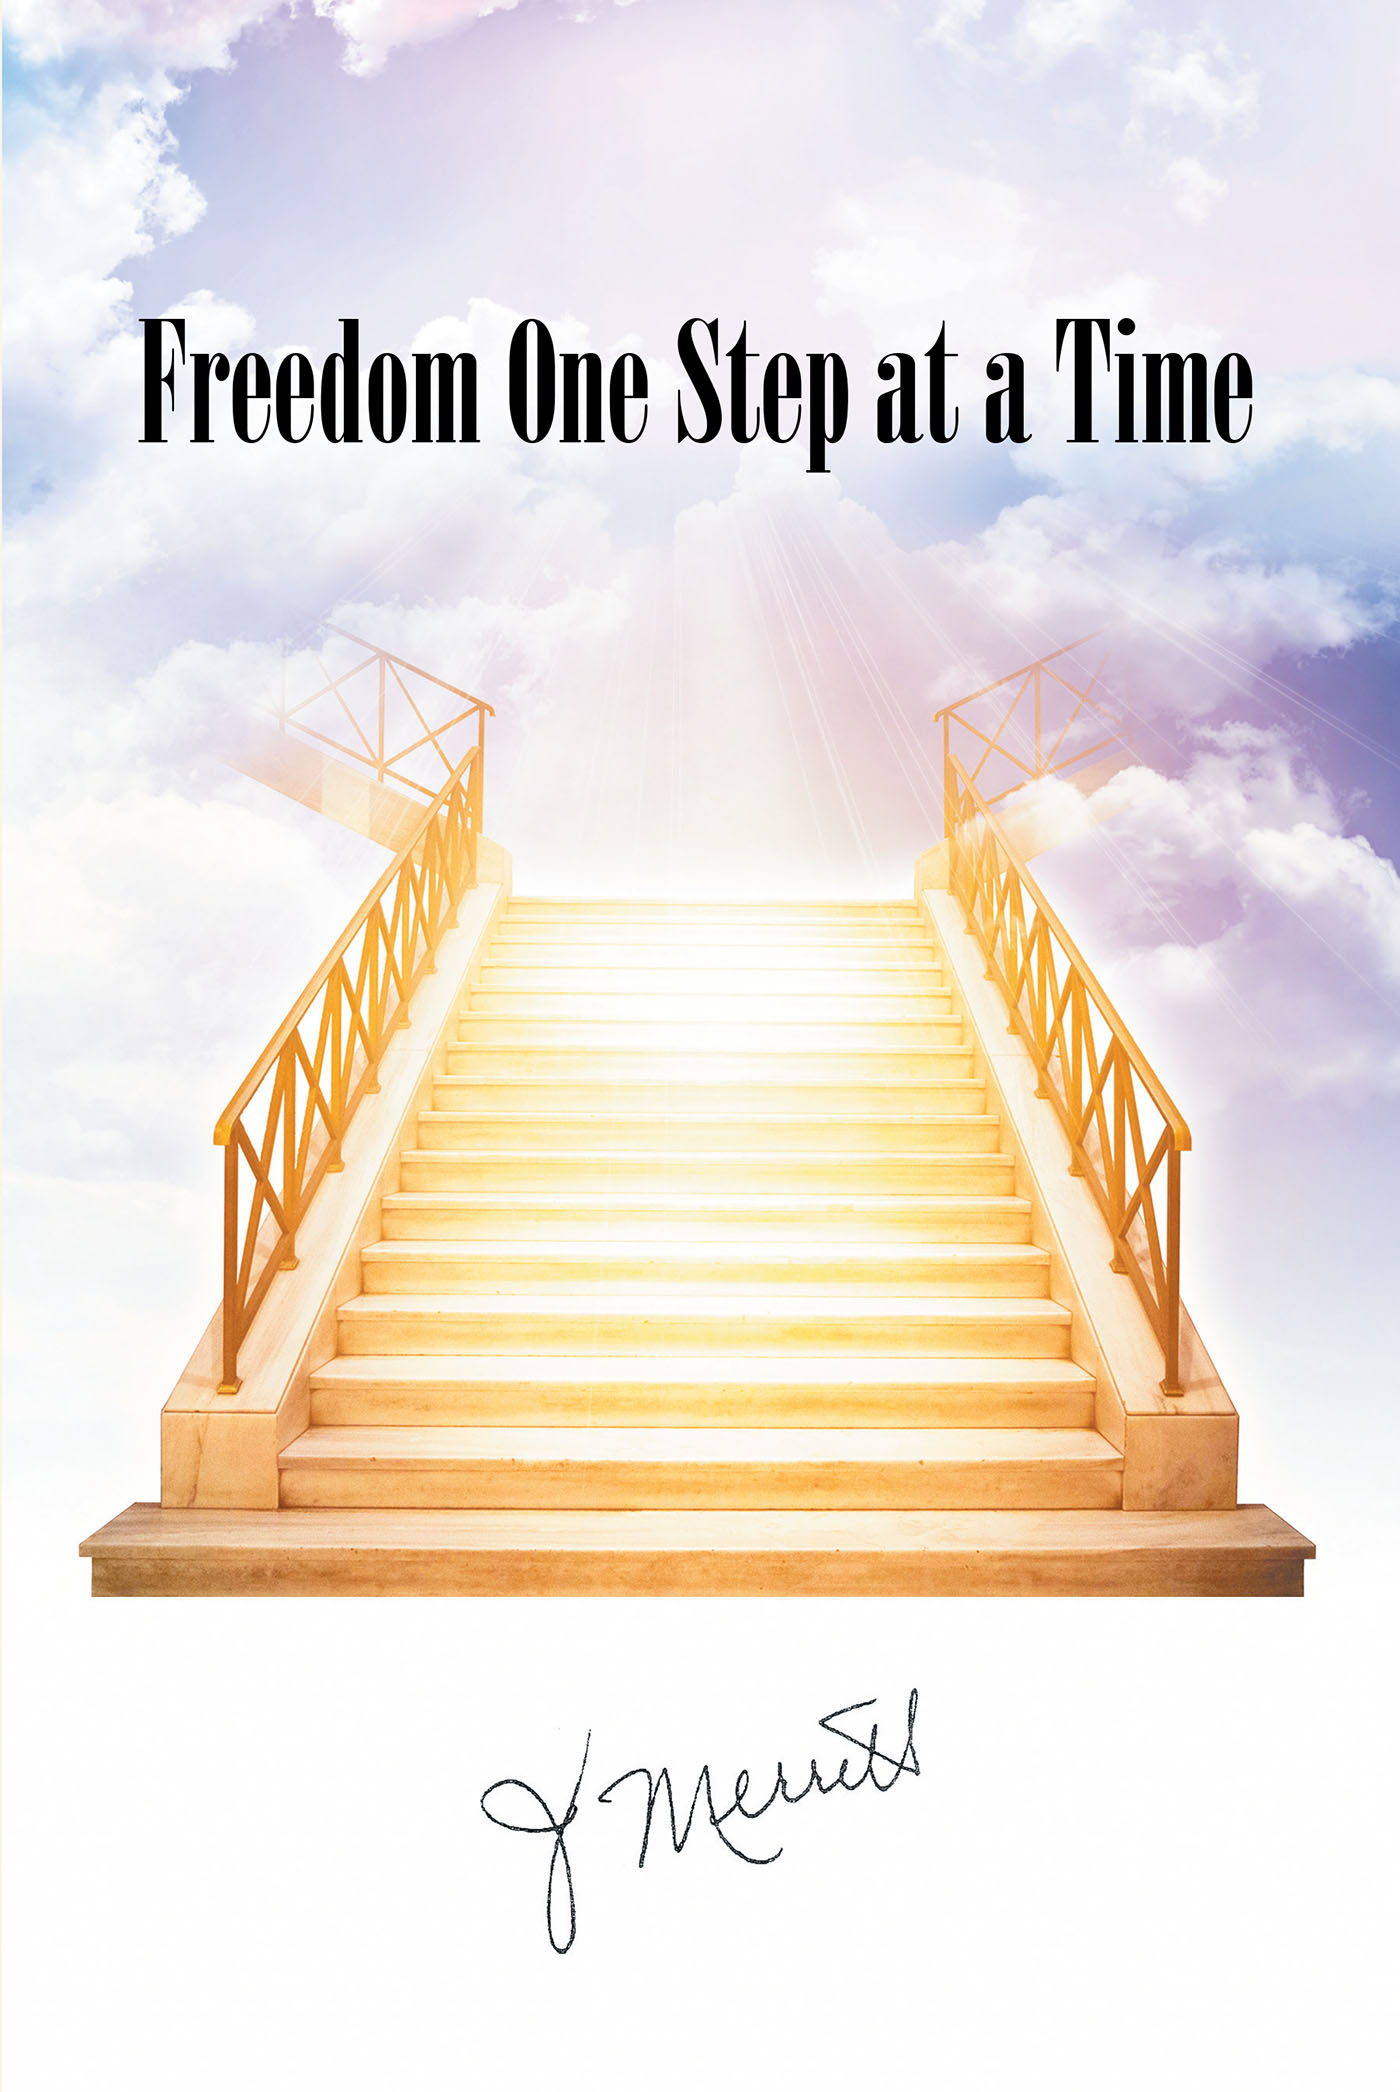 J Merritt’s Newly Released "Freedom One Step at a Time" is a Thoughtful Discussion of the Seven Tribes of the Old Testament